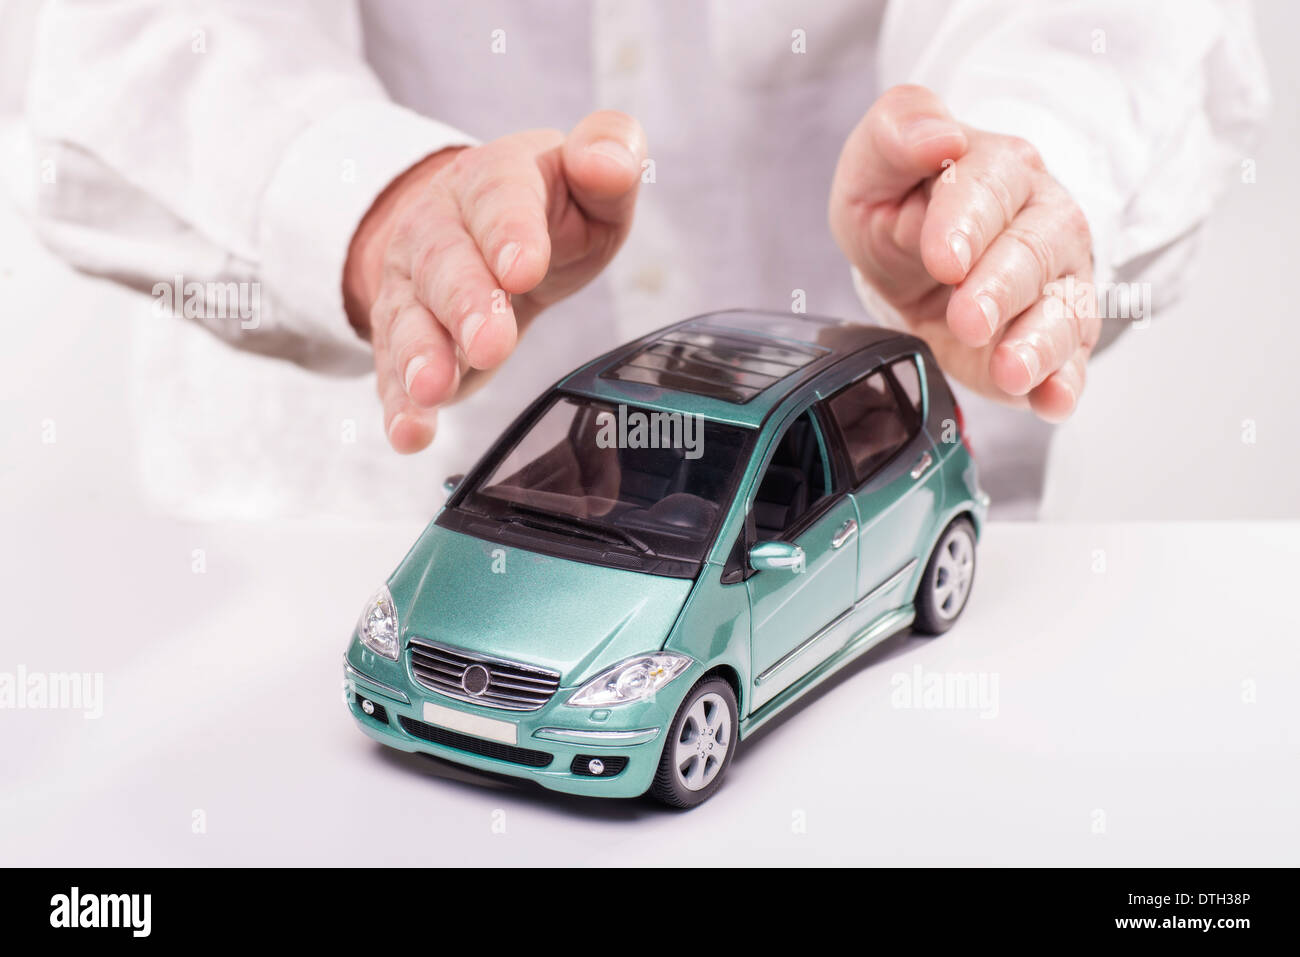 Hands lay protectively around a car. Stock Photo